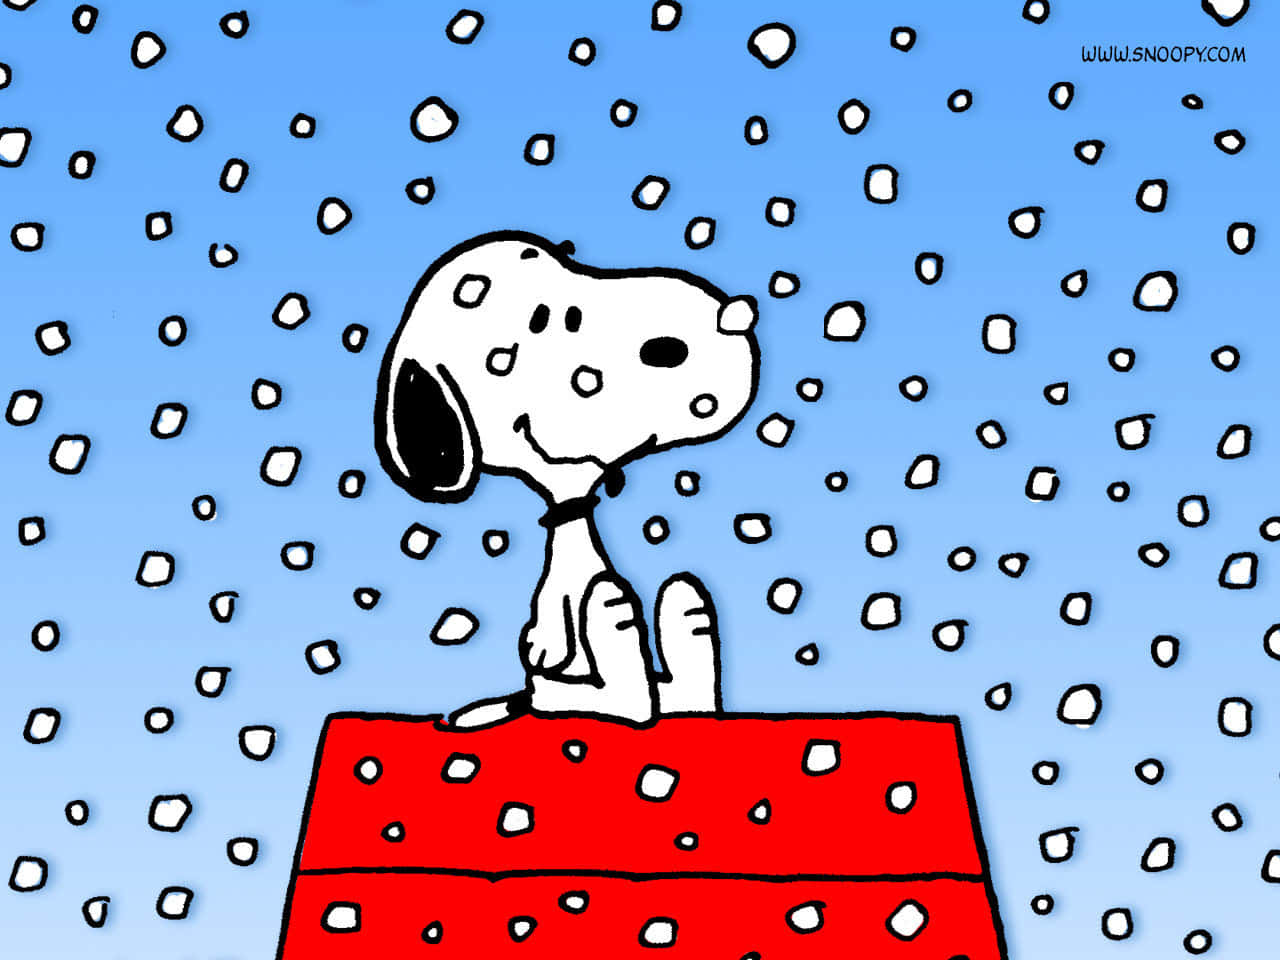 "Snoopy: Loyal companion and best friend to Charlie Brown."